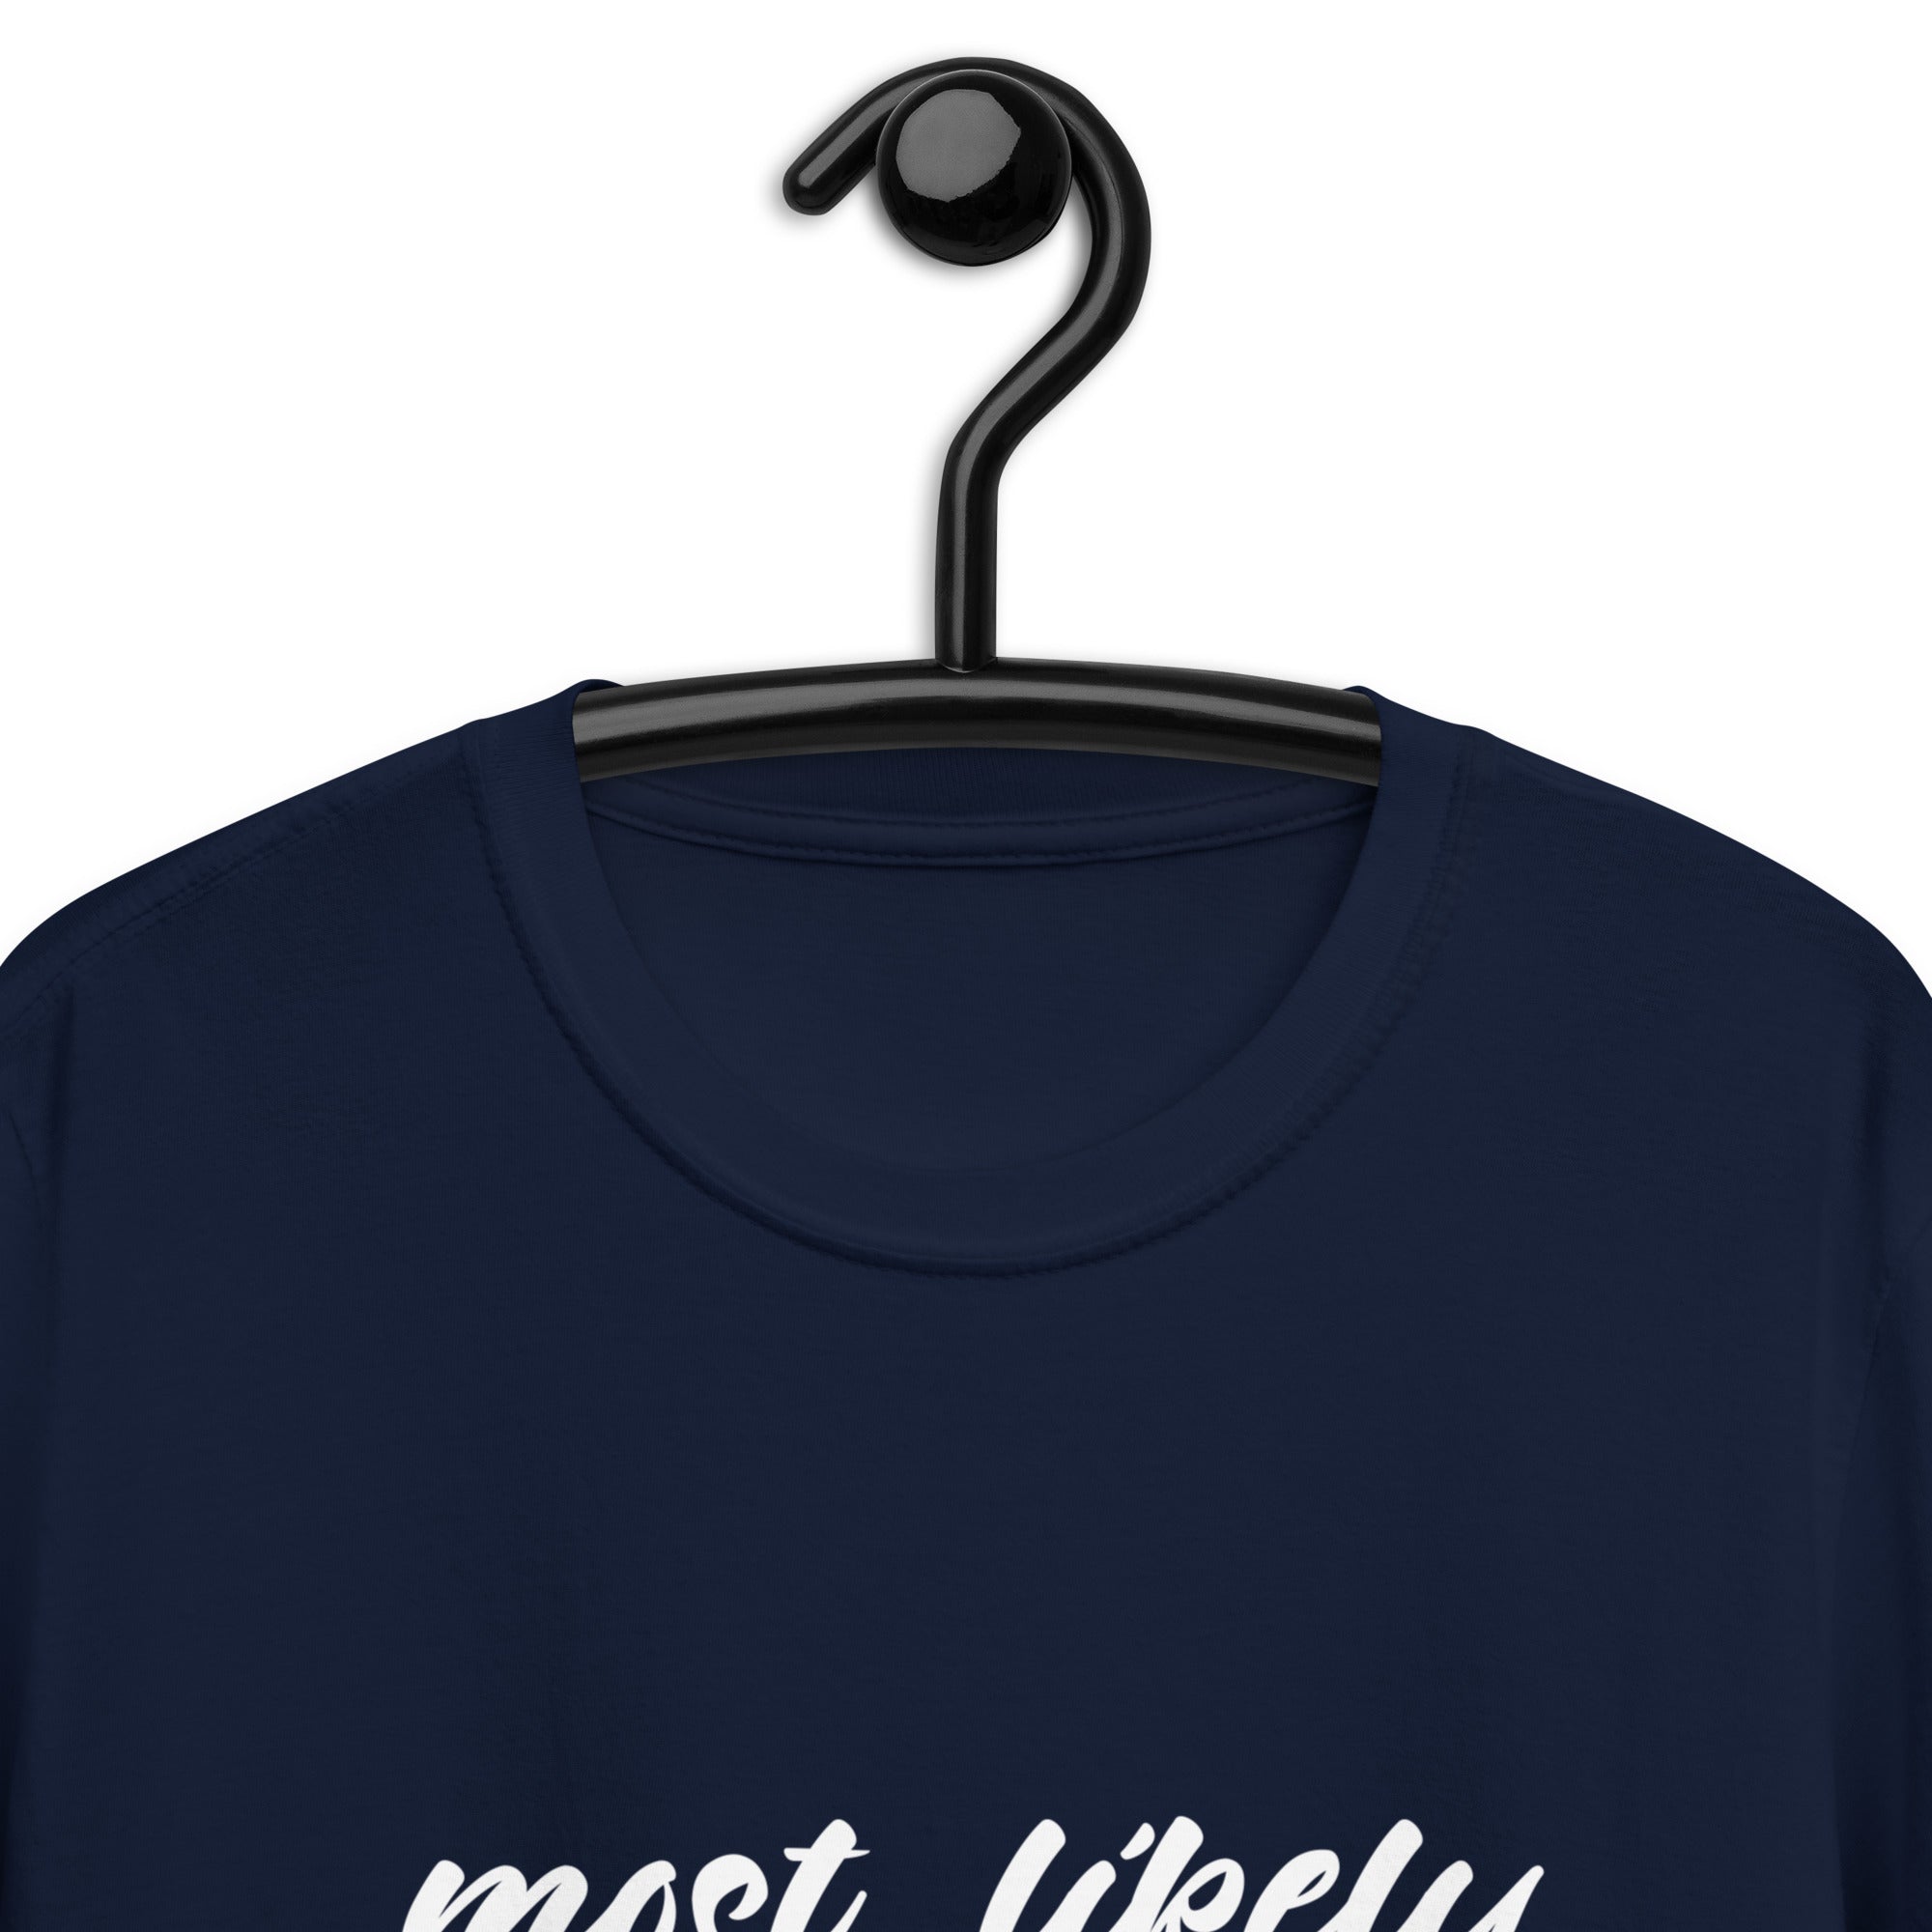 Short-Sleeve Unisex T-Shirt | Most Likely Contains Cat Hair